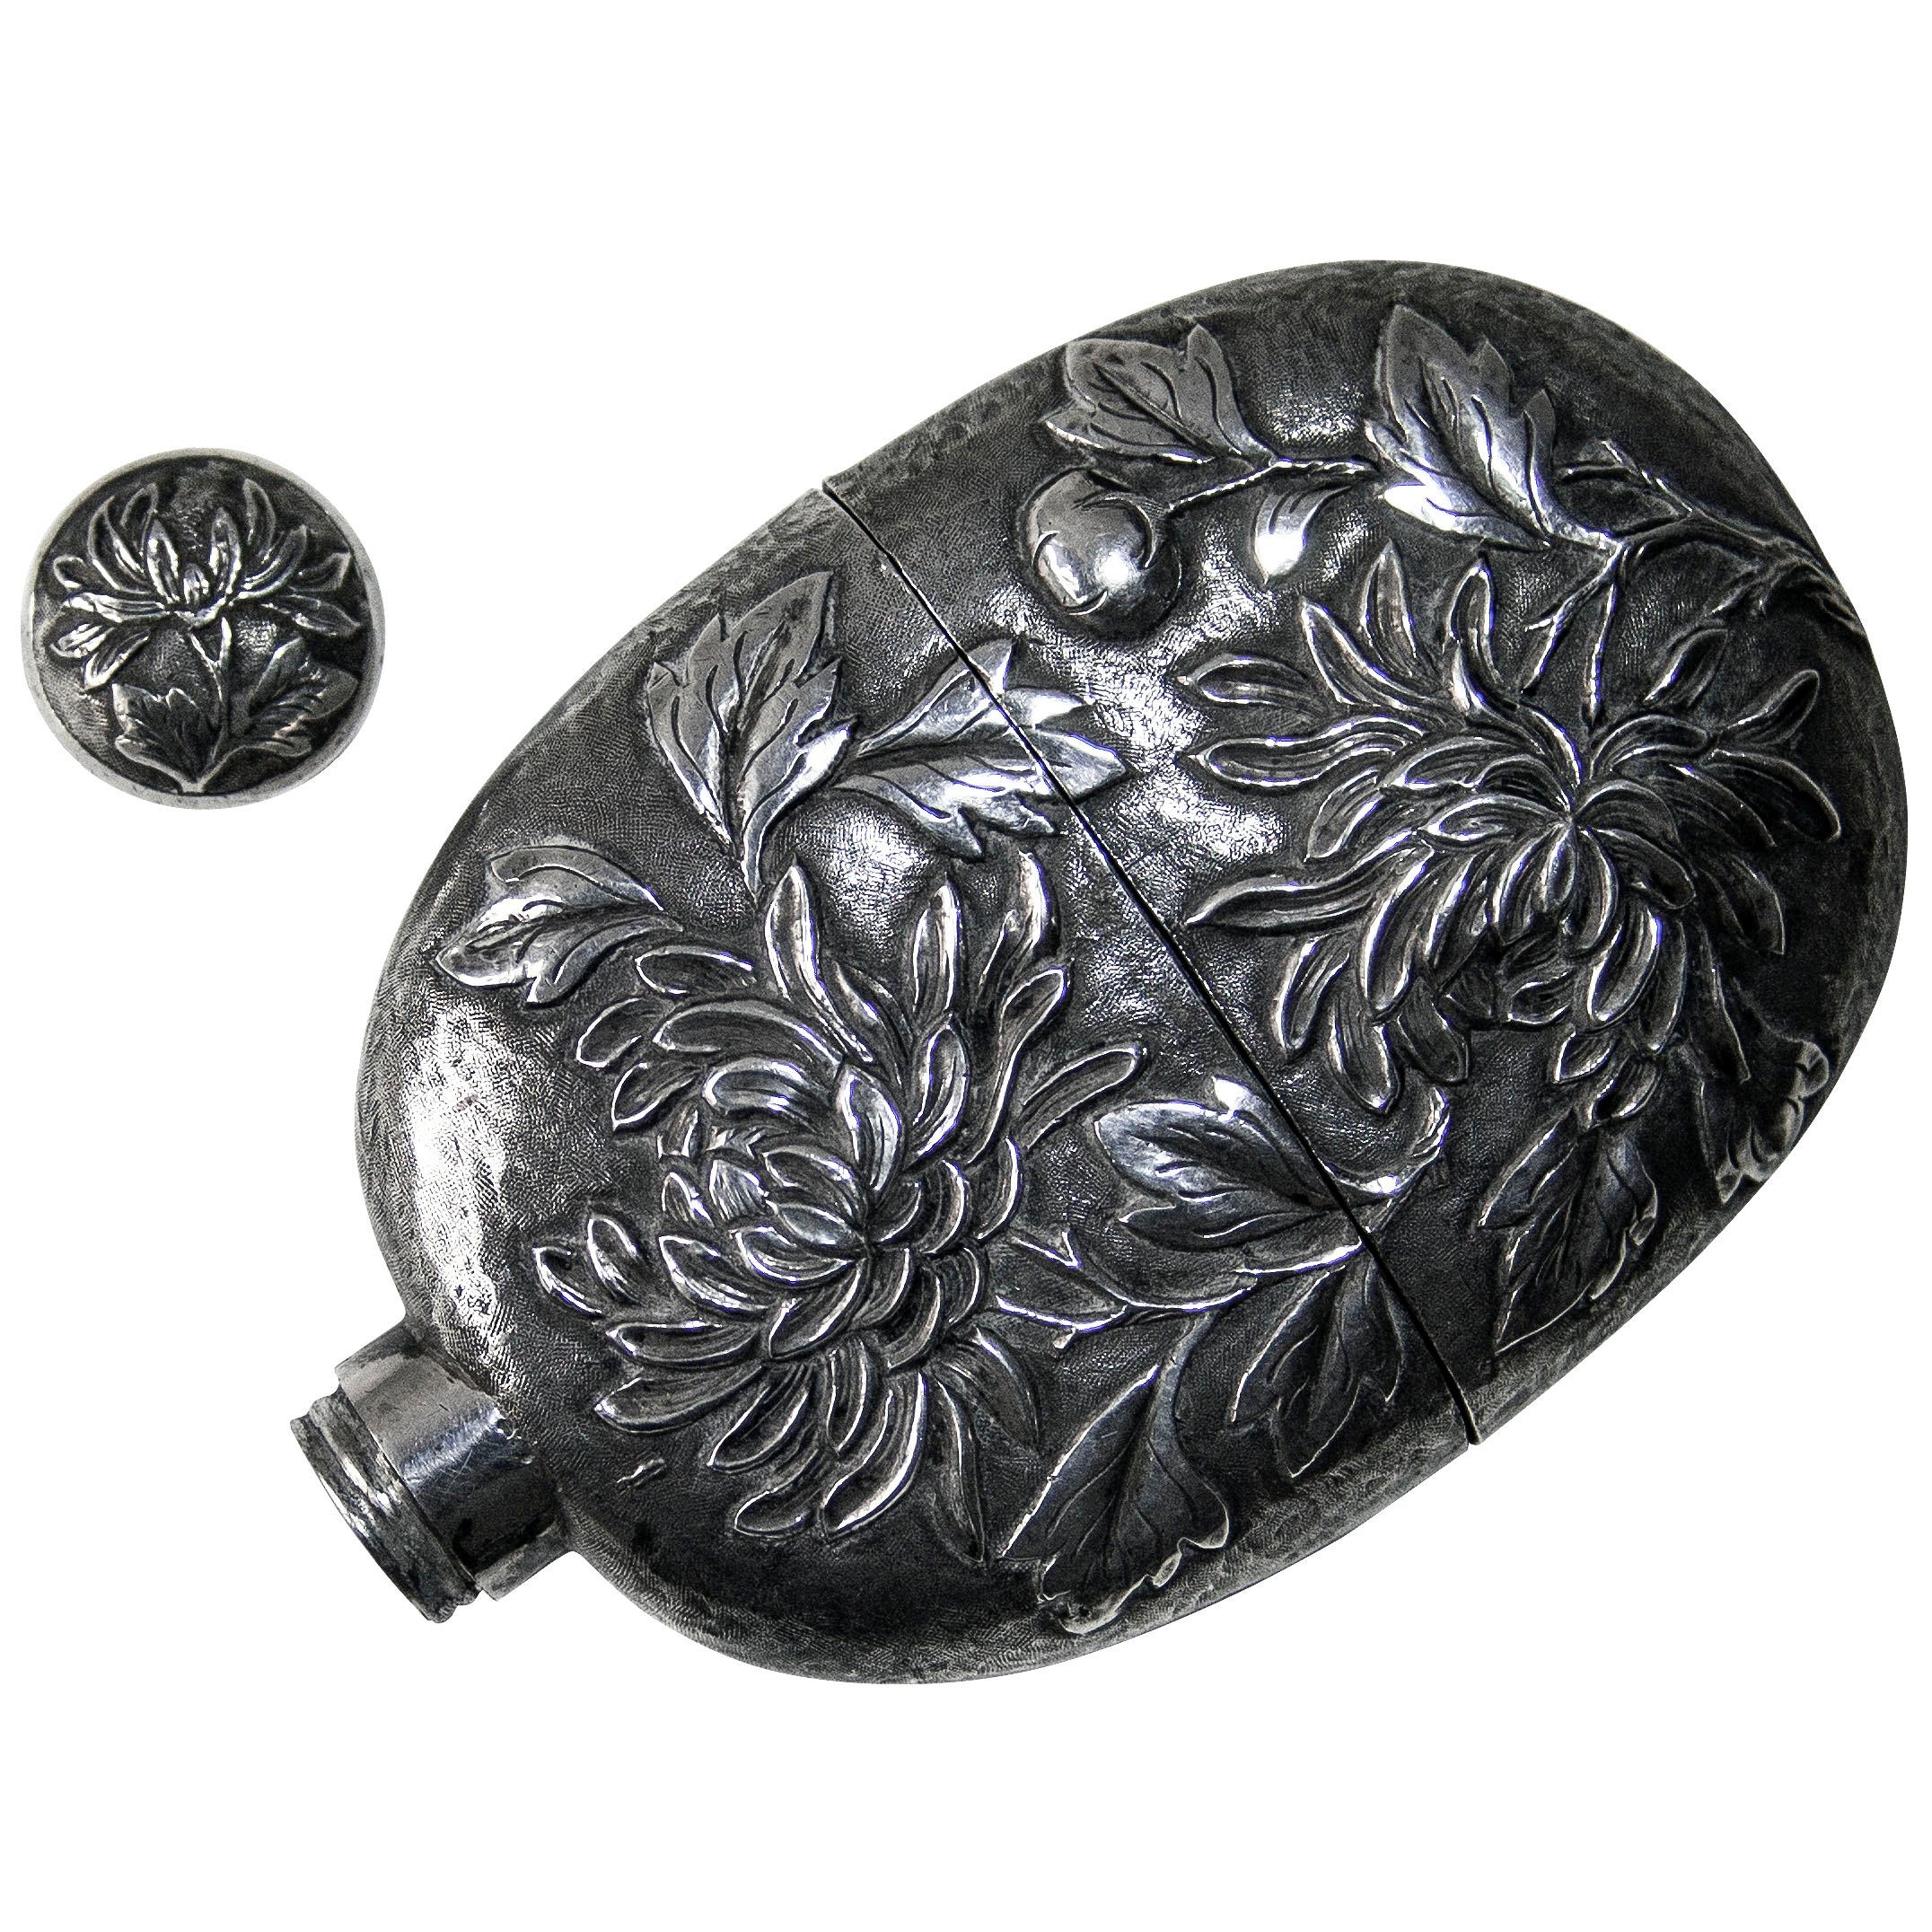 A superb quality Chinese export silver spirit drinking flask with pull-off drinking cup and screw-top stopper. The body of the flask, cup and screw-top are all hand-chased and raised in the Chrysanthemum design.